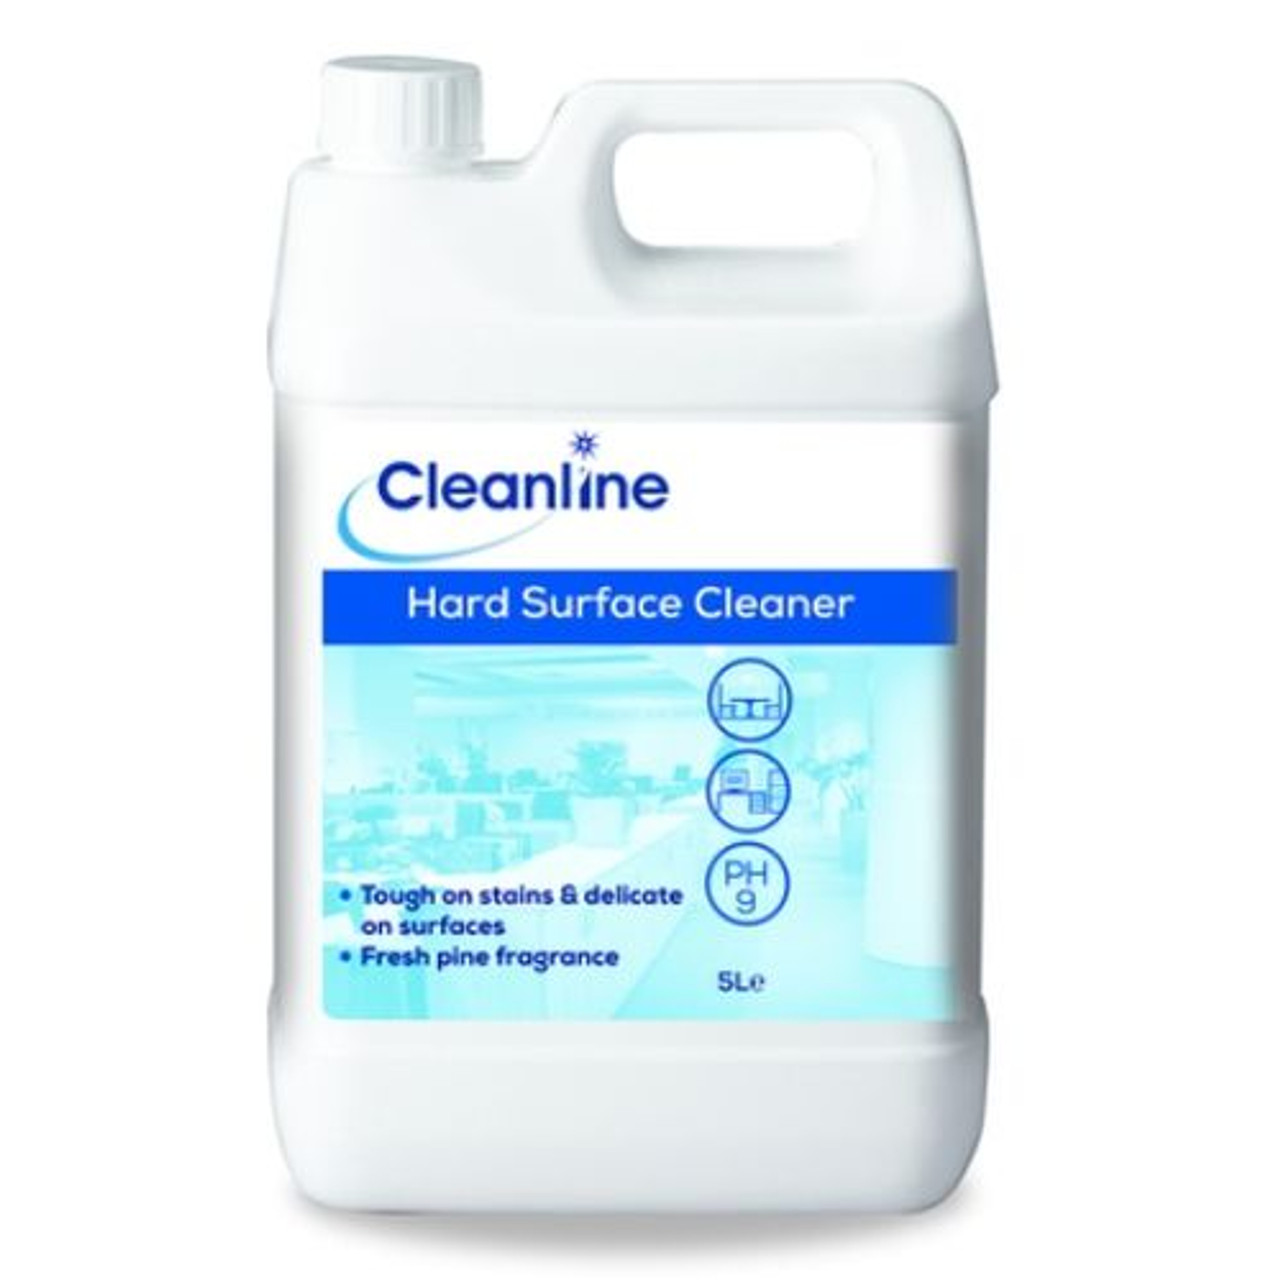 Cleanline Hard Surface Cleaner 5ltr - Diamond Industrial Supplies